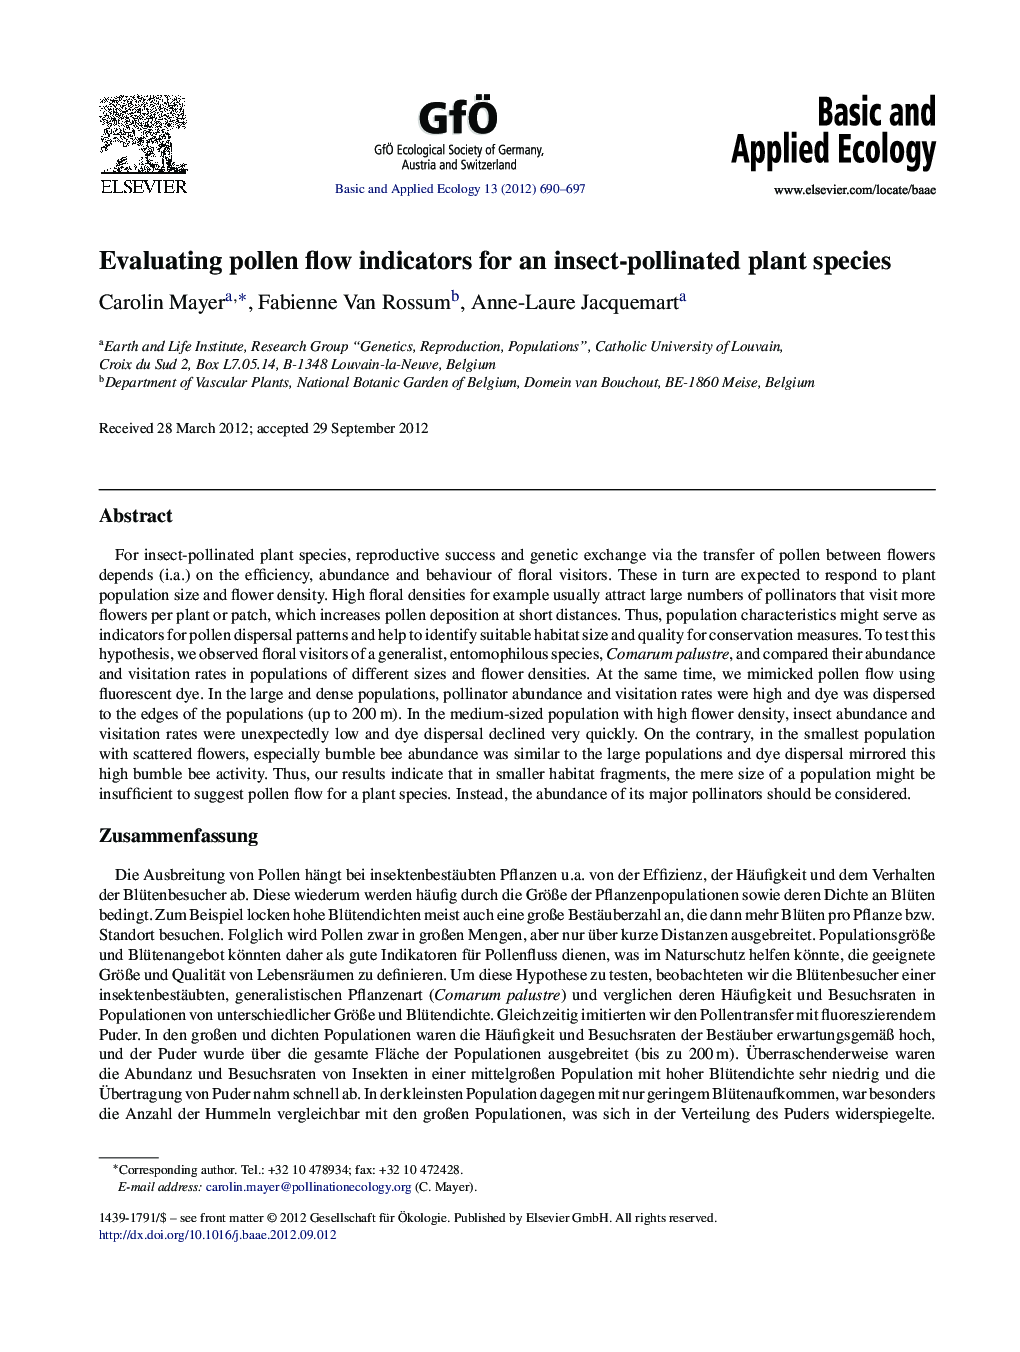 Evaluating pollen flow indicators for an insect-pollinated plant species